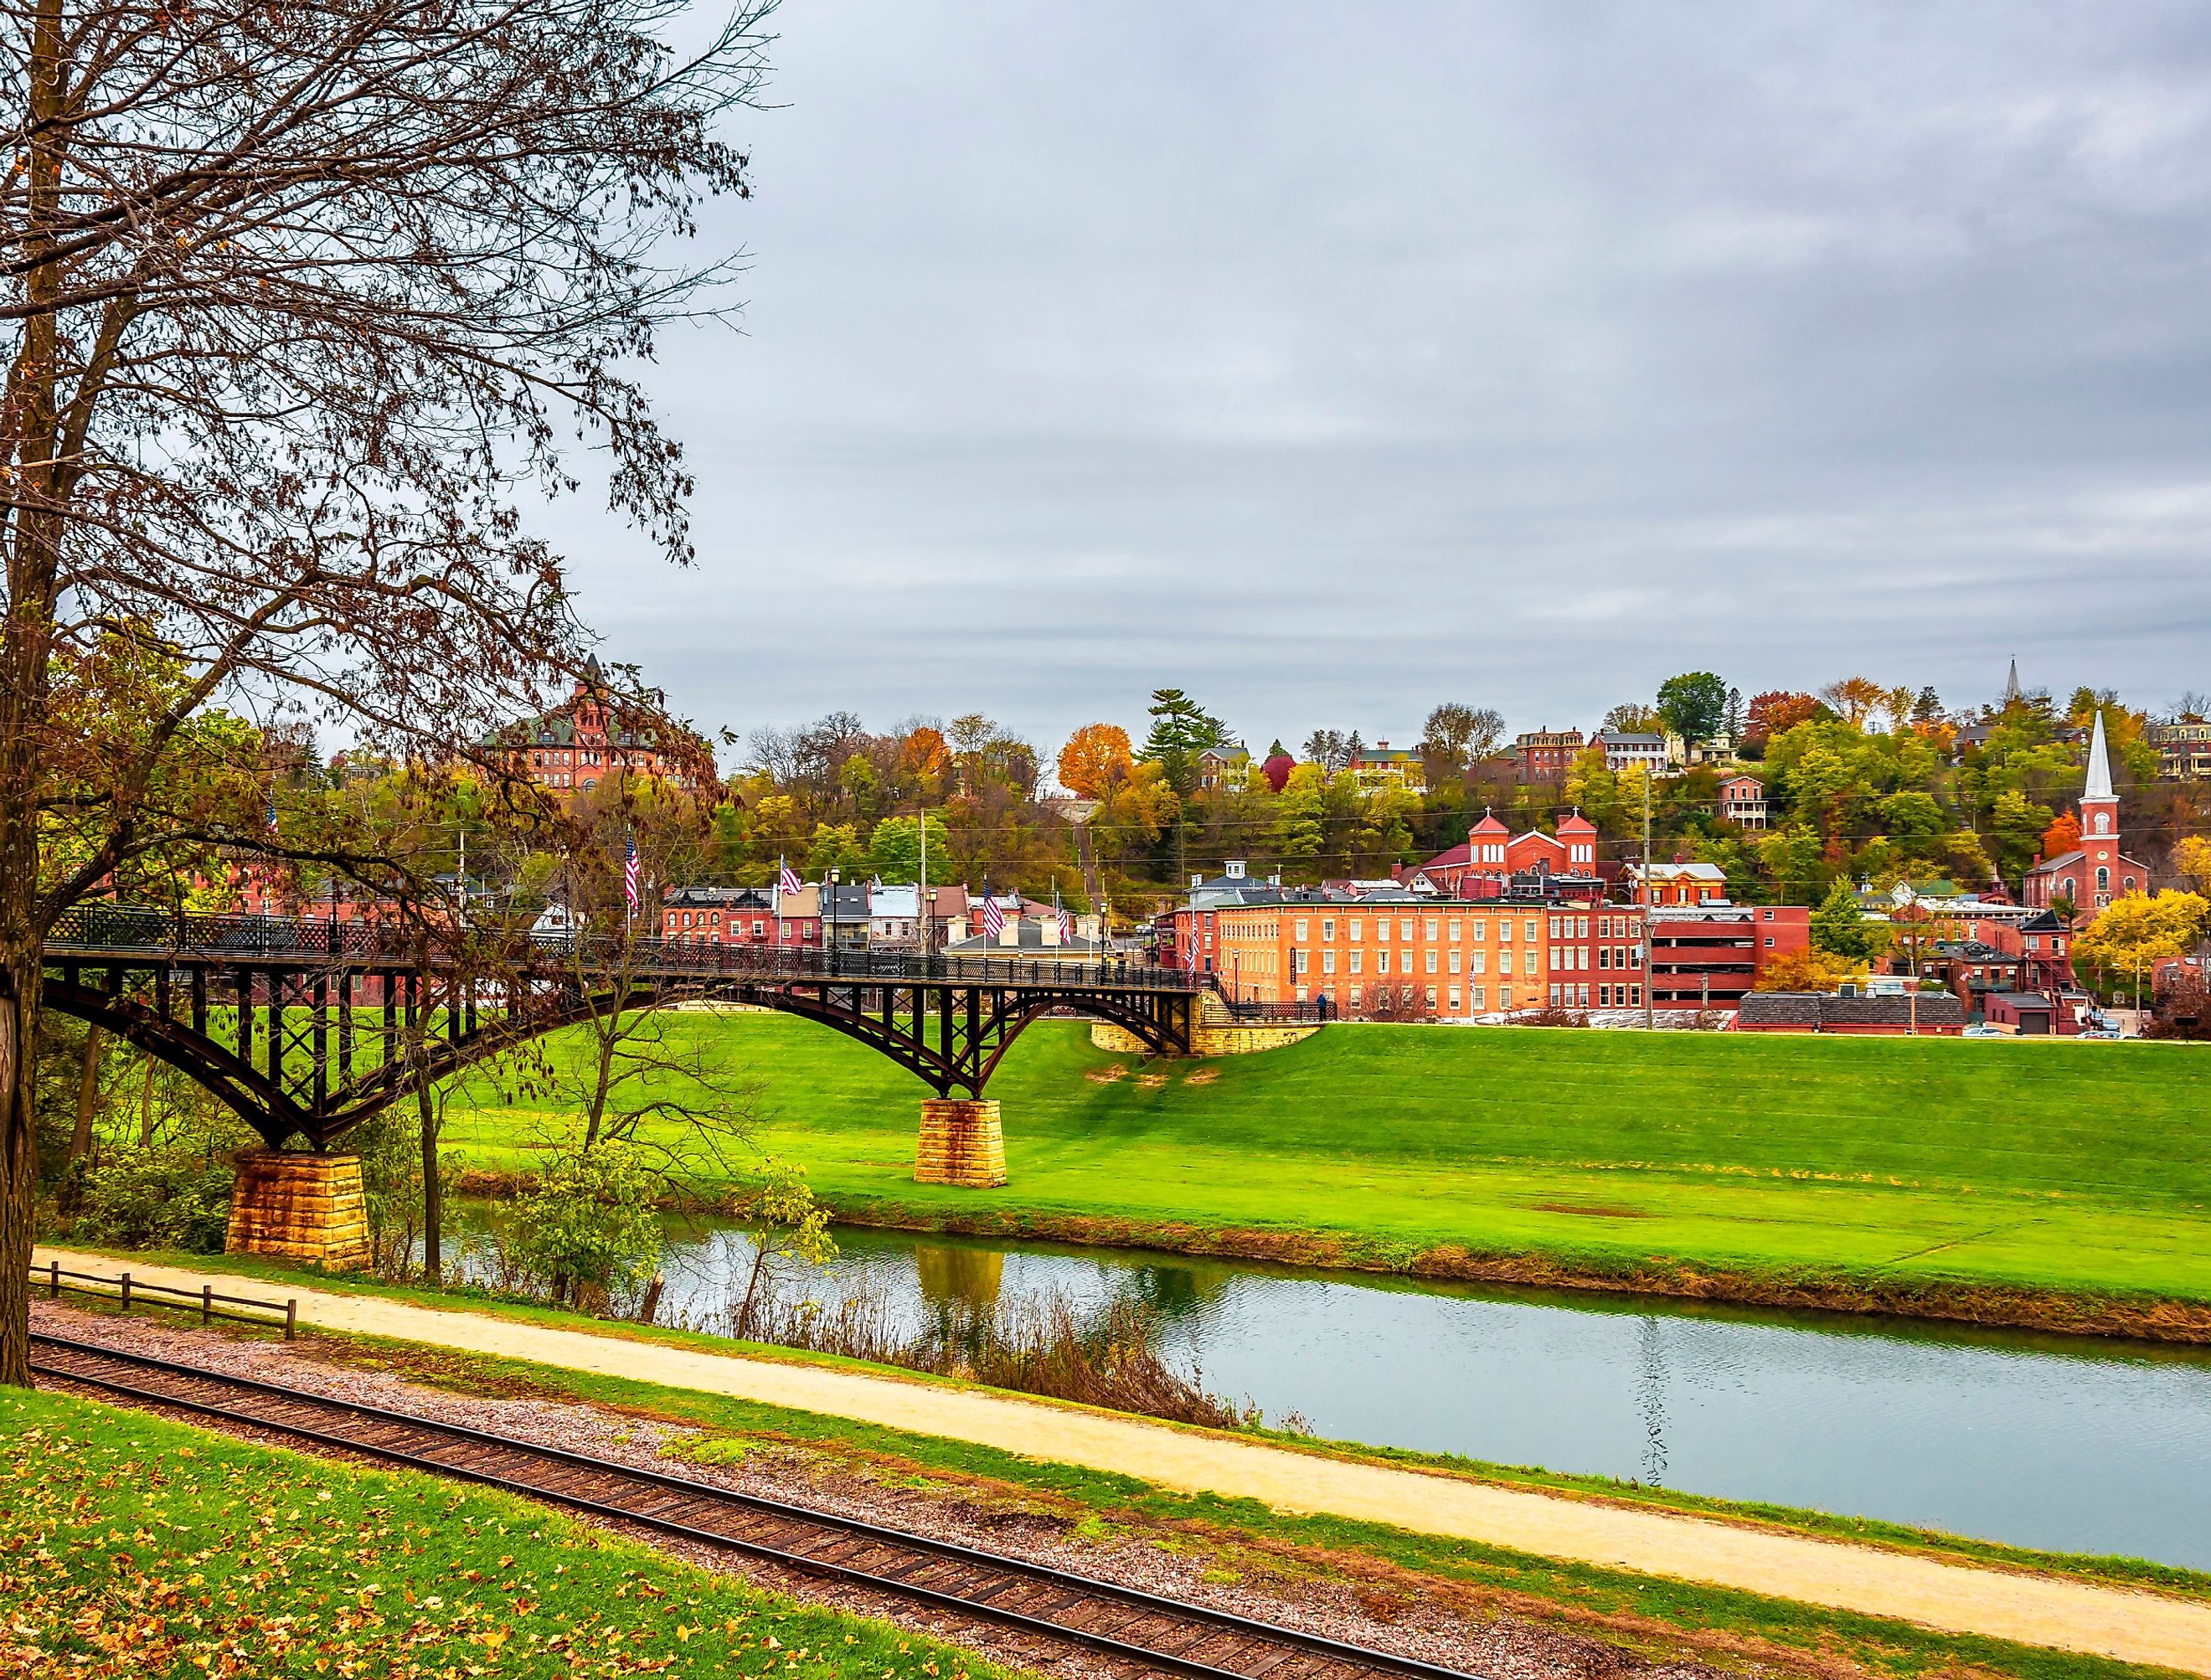 Historical Galena Town view at Autumn in Illinois of USA. Image credit Nejdet Duzen via shutterstock